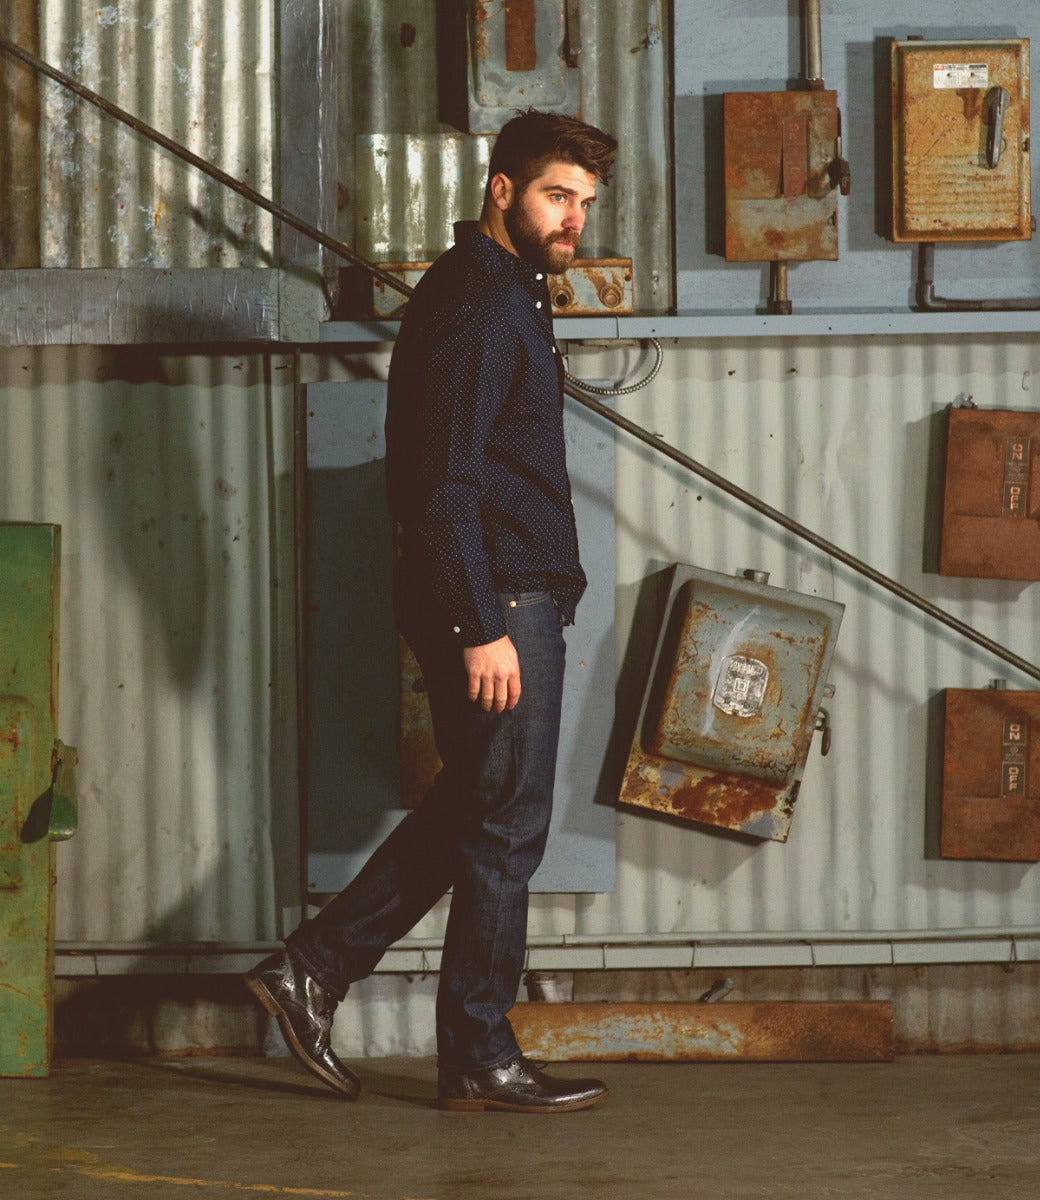 A man with a beard wearing jeans and a Bed Stu Illiad boot stands beside metal containers in a dimly-lit industrial setting.